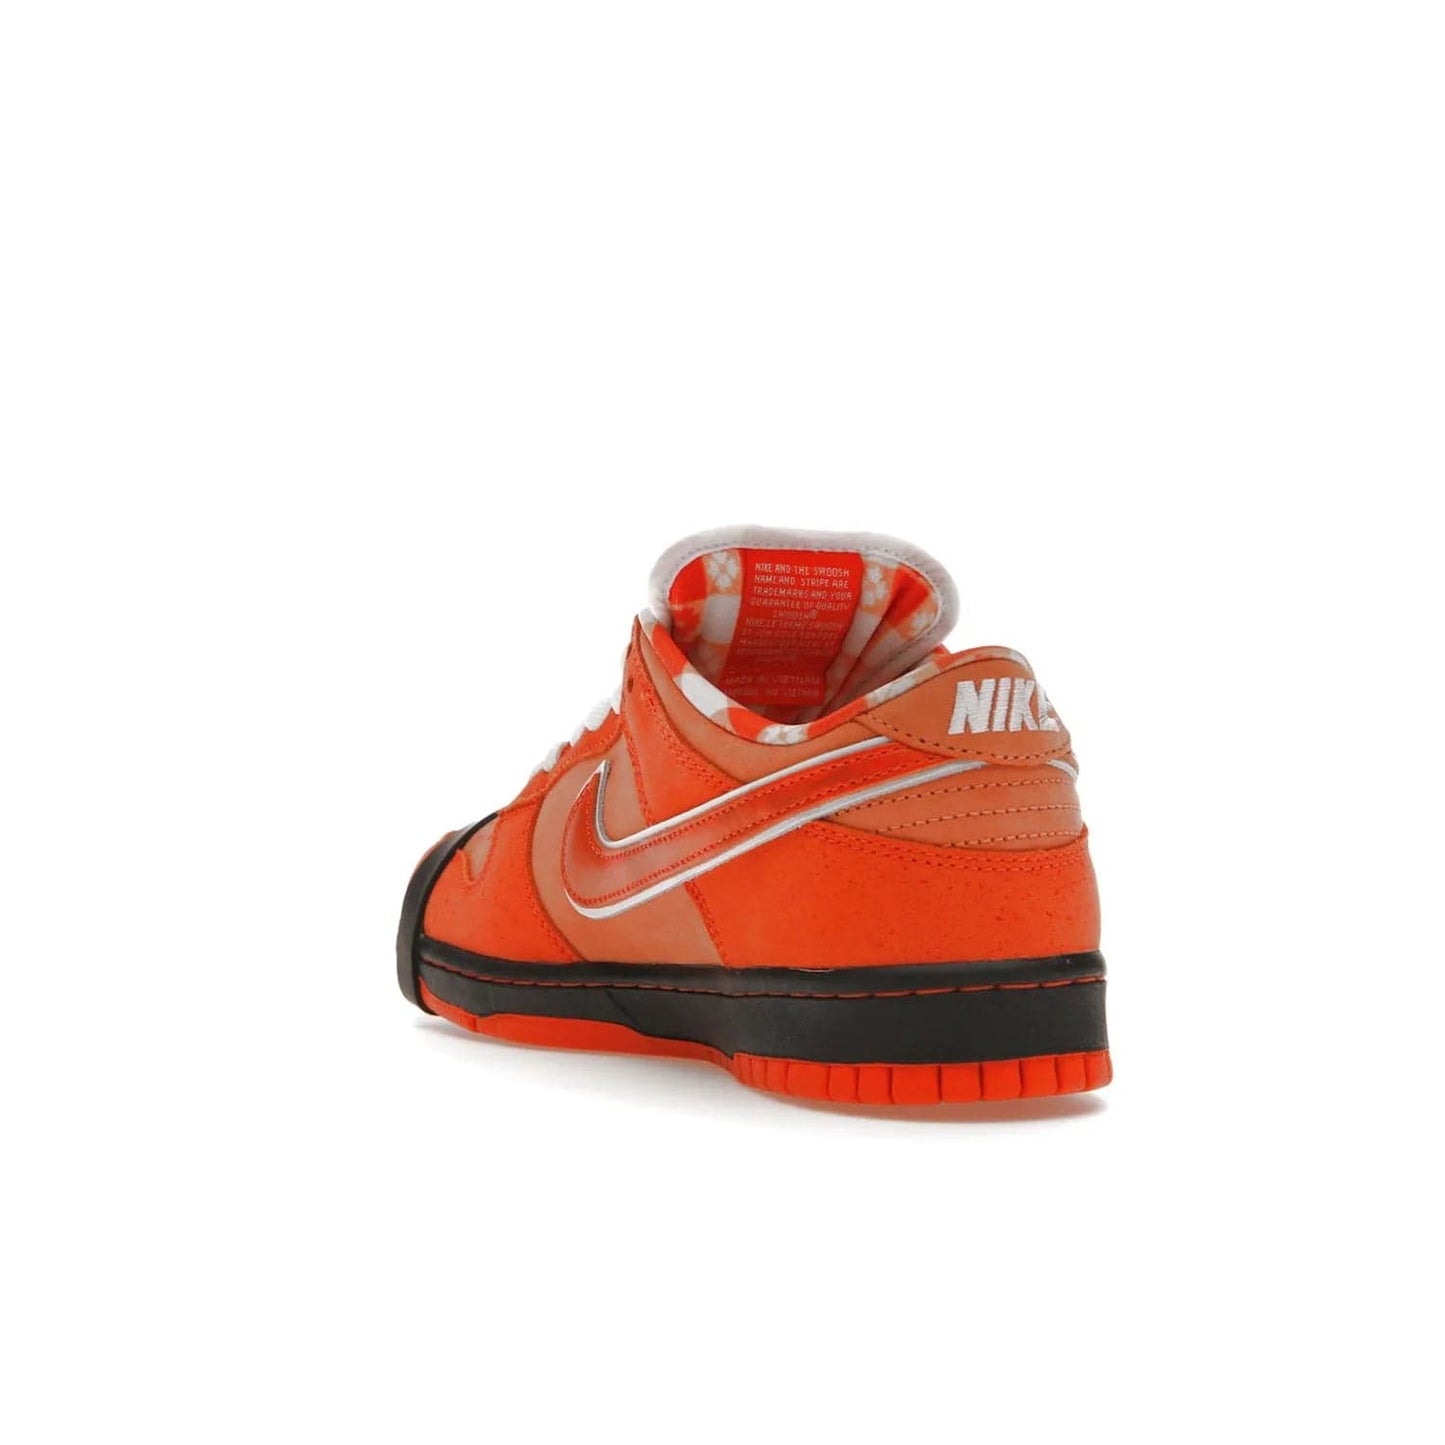 Nike SB Dunk Low Concepts Orange Lobster - Image 25 - Only at www.BallersClubKickz.com - Limited Nike SB Dunk Low Concepts Orange Lobster features premium nubuck upper with vibrant oranges for eye-catching colorblocked design. Signature Nike SB tag and bib-inspired interior for added texture. Outsole and cupsole provide extra reinforcement. Get it 12/20/2022.